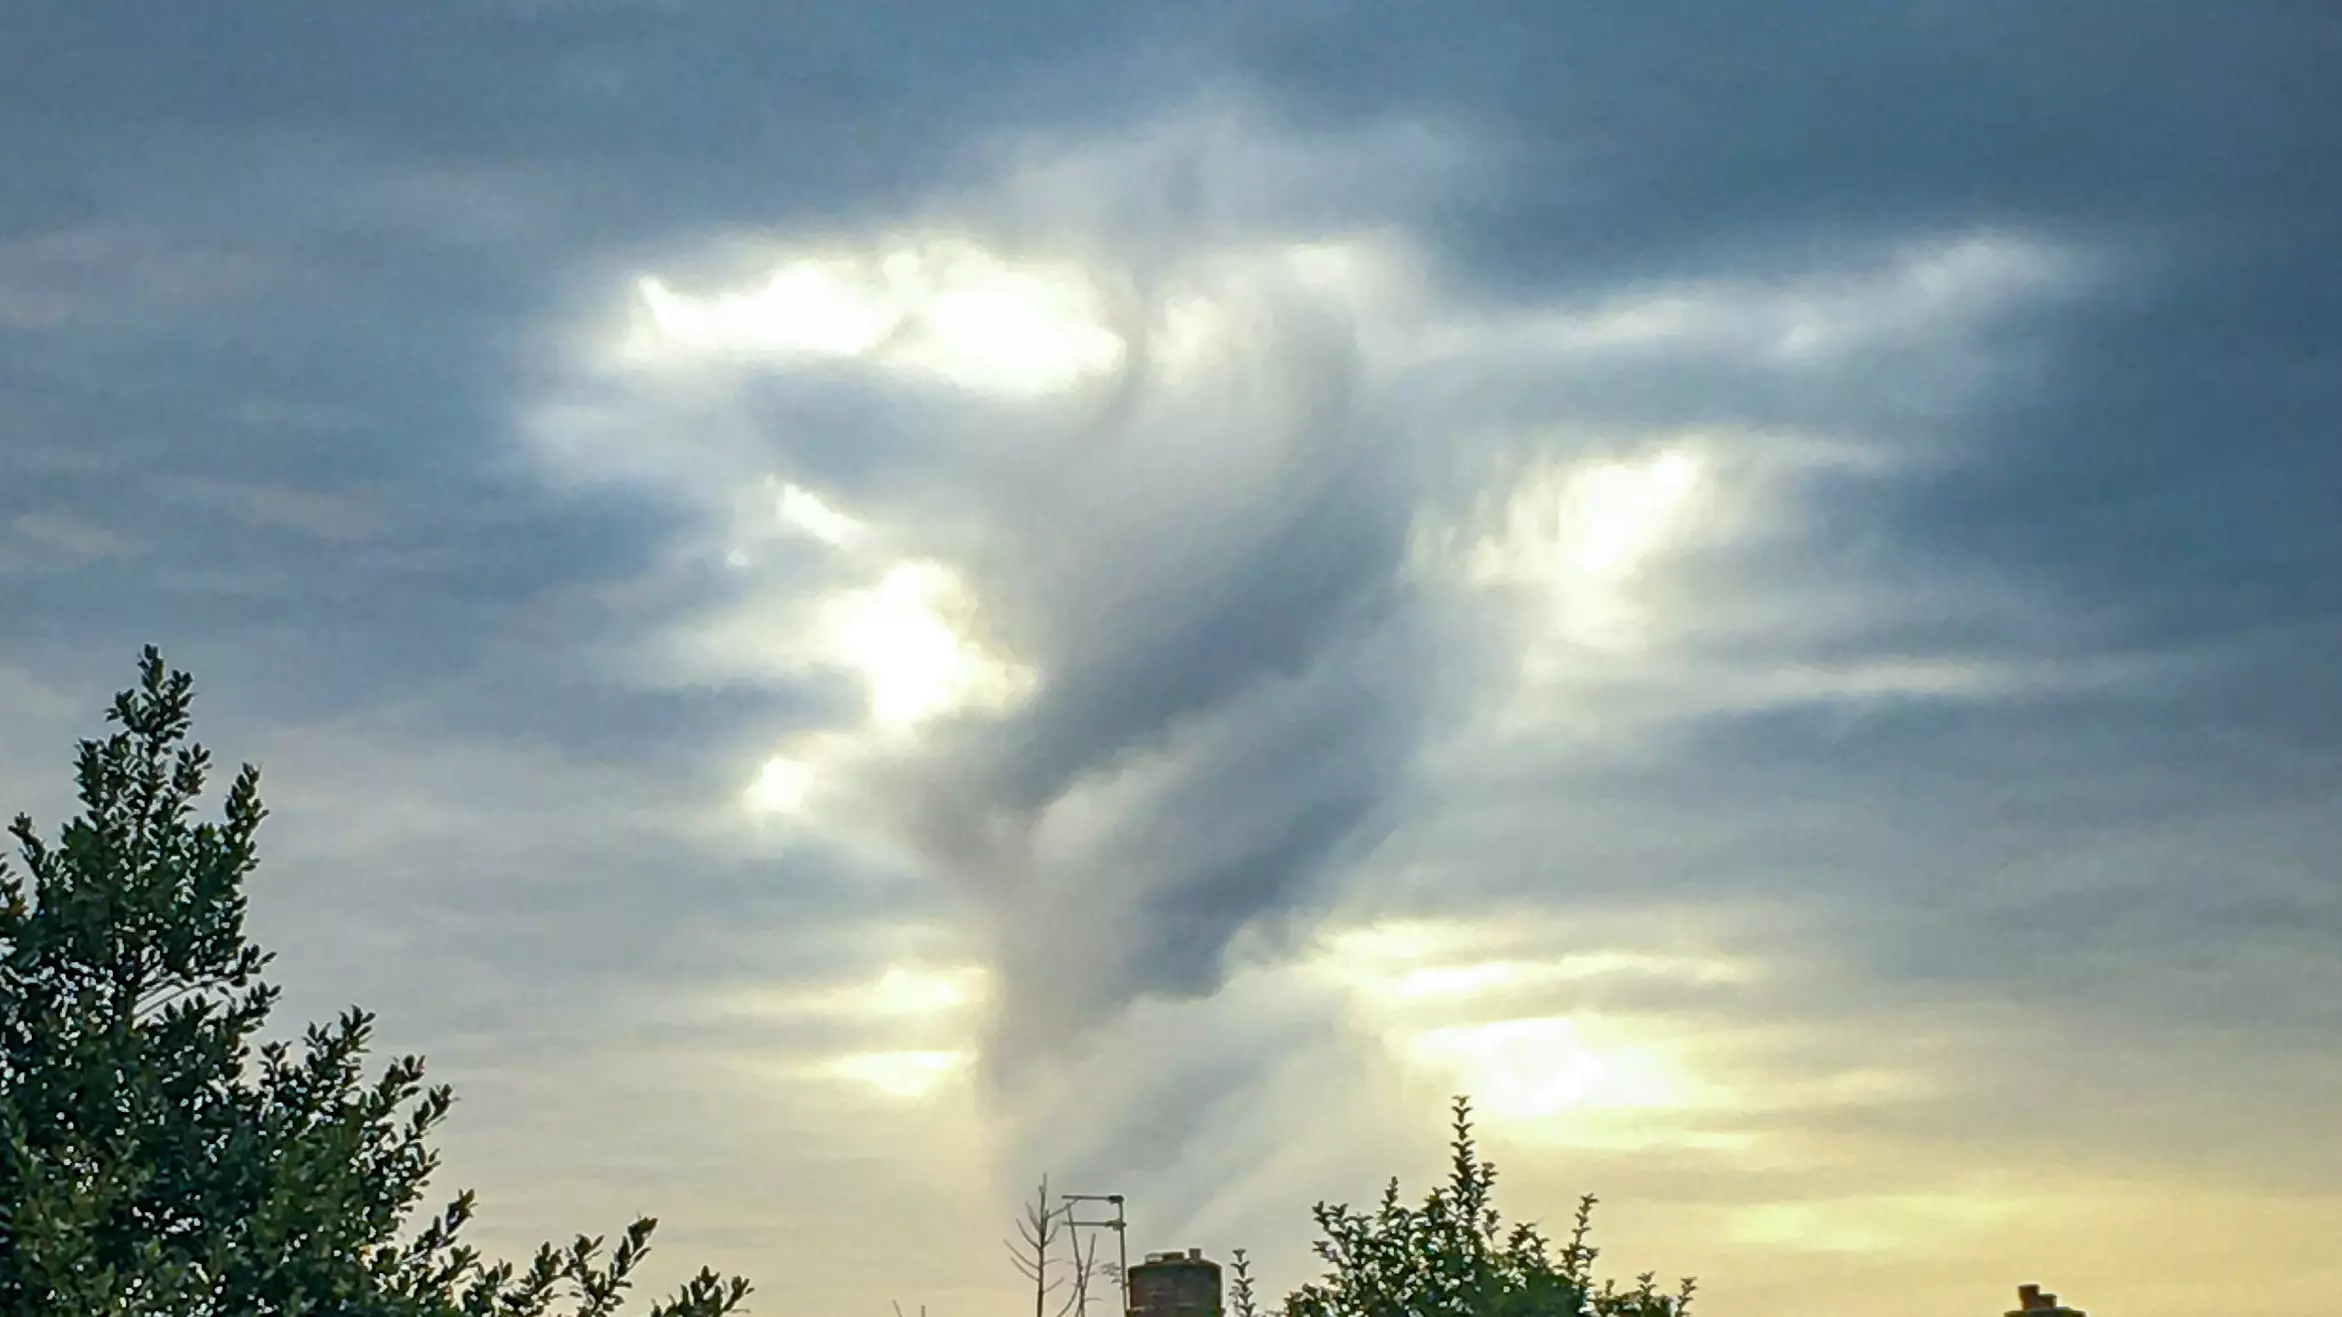 Woman Shares Photo Of Cloud That Looks Like 'Jesus With His Arms Outstretched' 